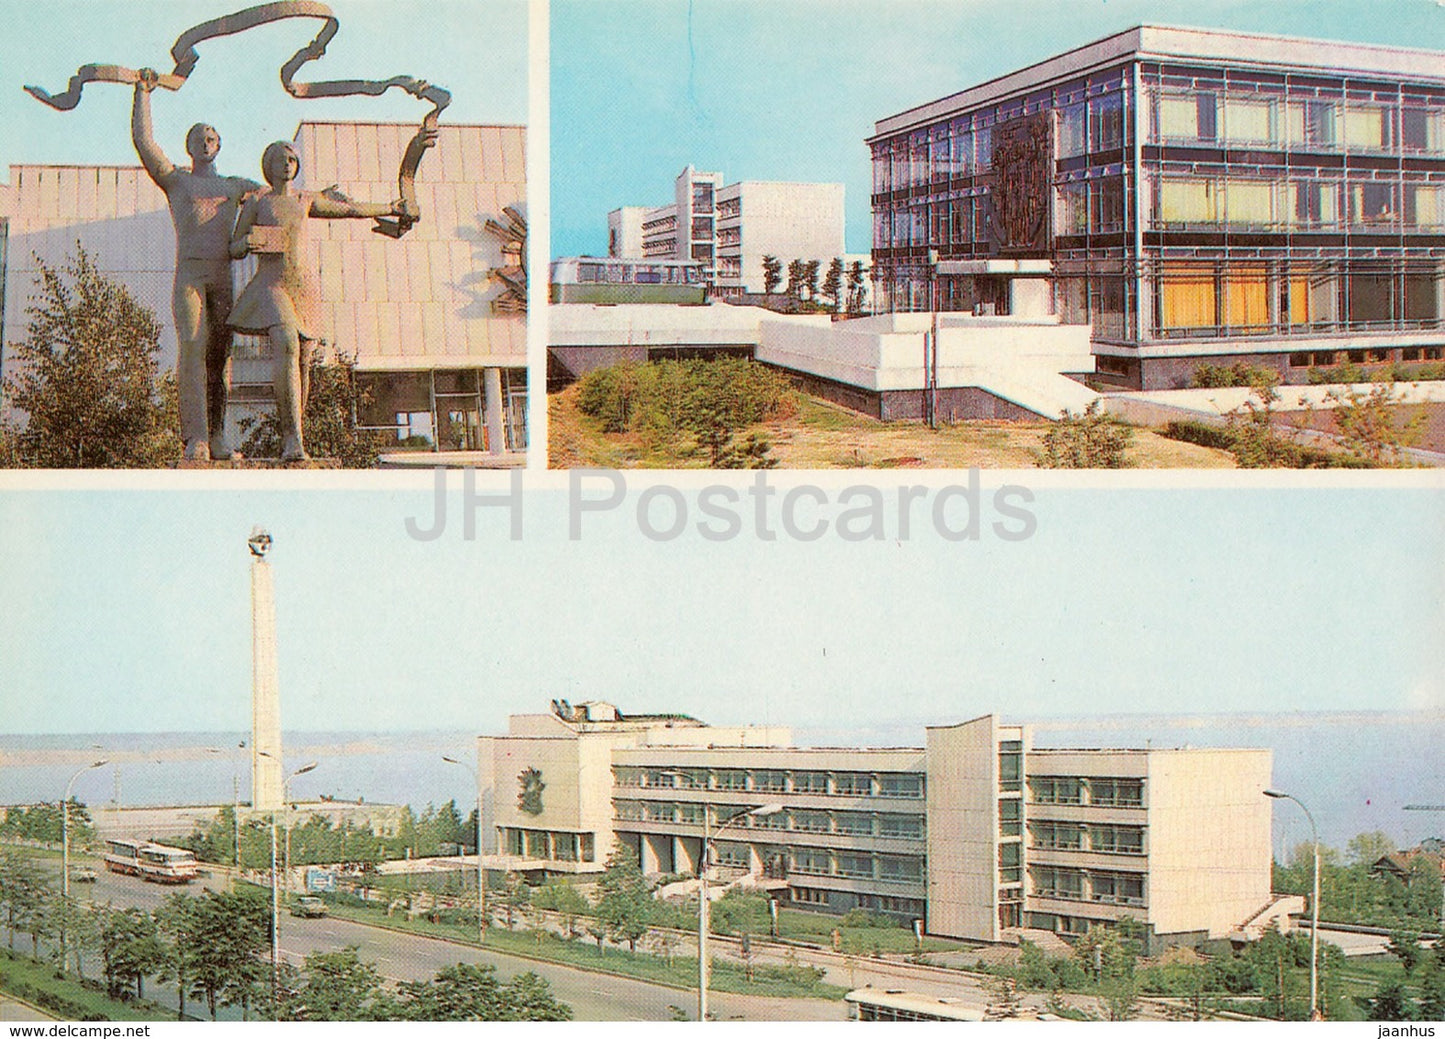 Ulyanovsk - sculpture Youth - Regional Children Library - Pioneer Palace postal stationery - 1984 - Russia USSR - unused - JH Postcards